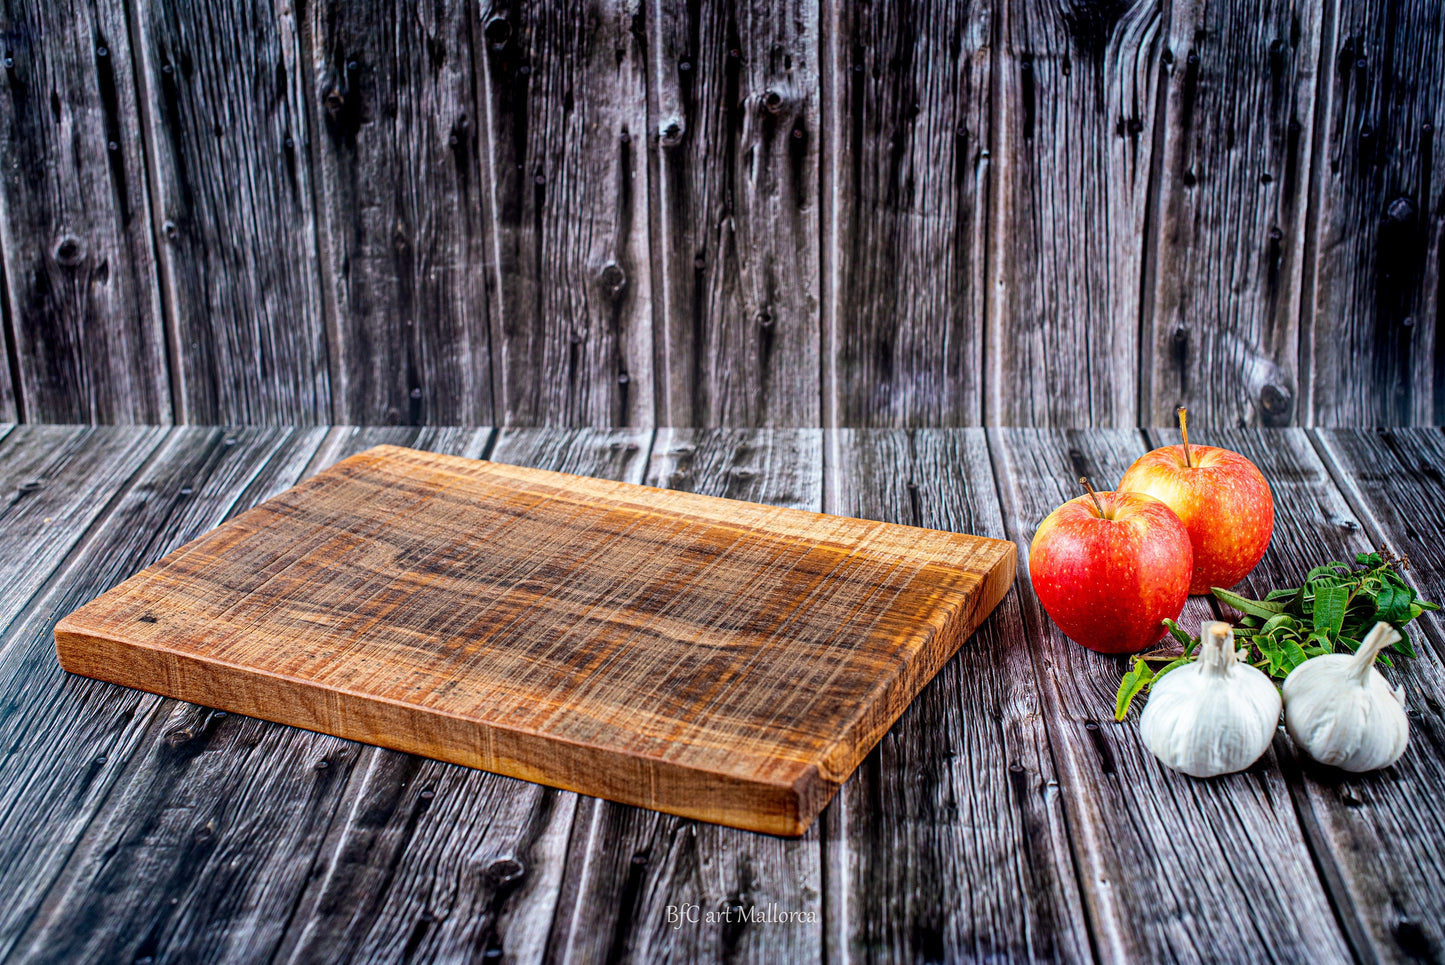 Vintage Cutting Board Olive Wood, Rustic Chopping board, Rustic Strong Wood Cutting Board, Board Olive Wood, Wooden Meat Tray, Kitchen Decor